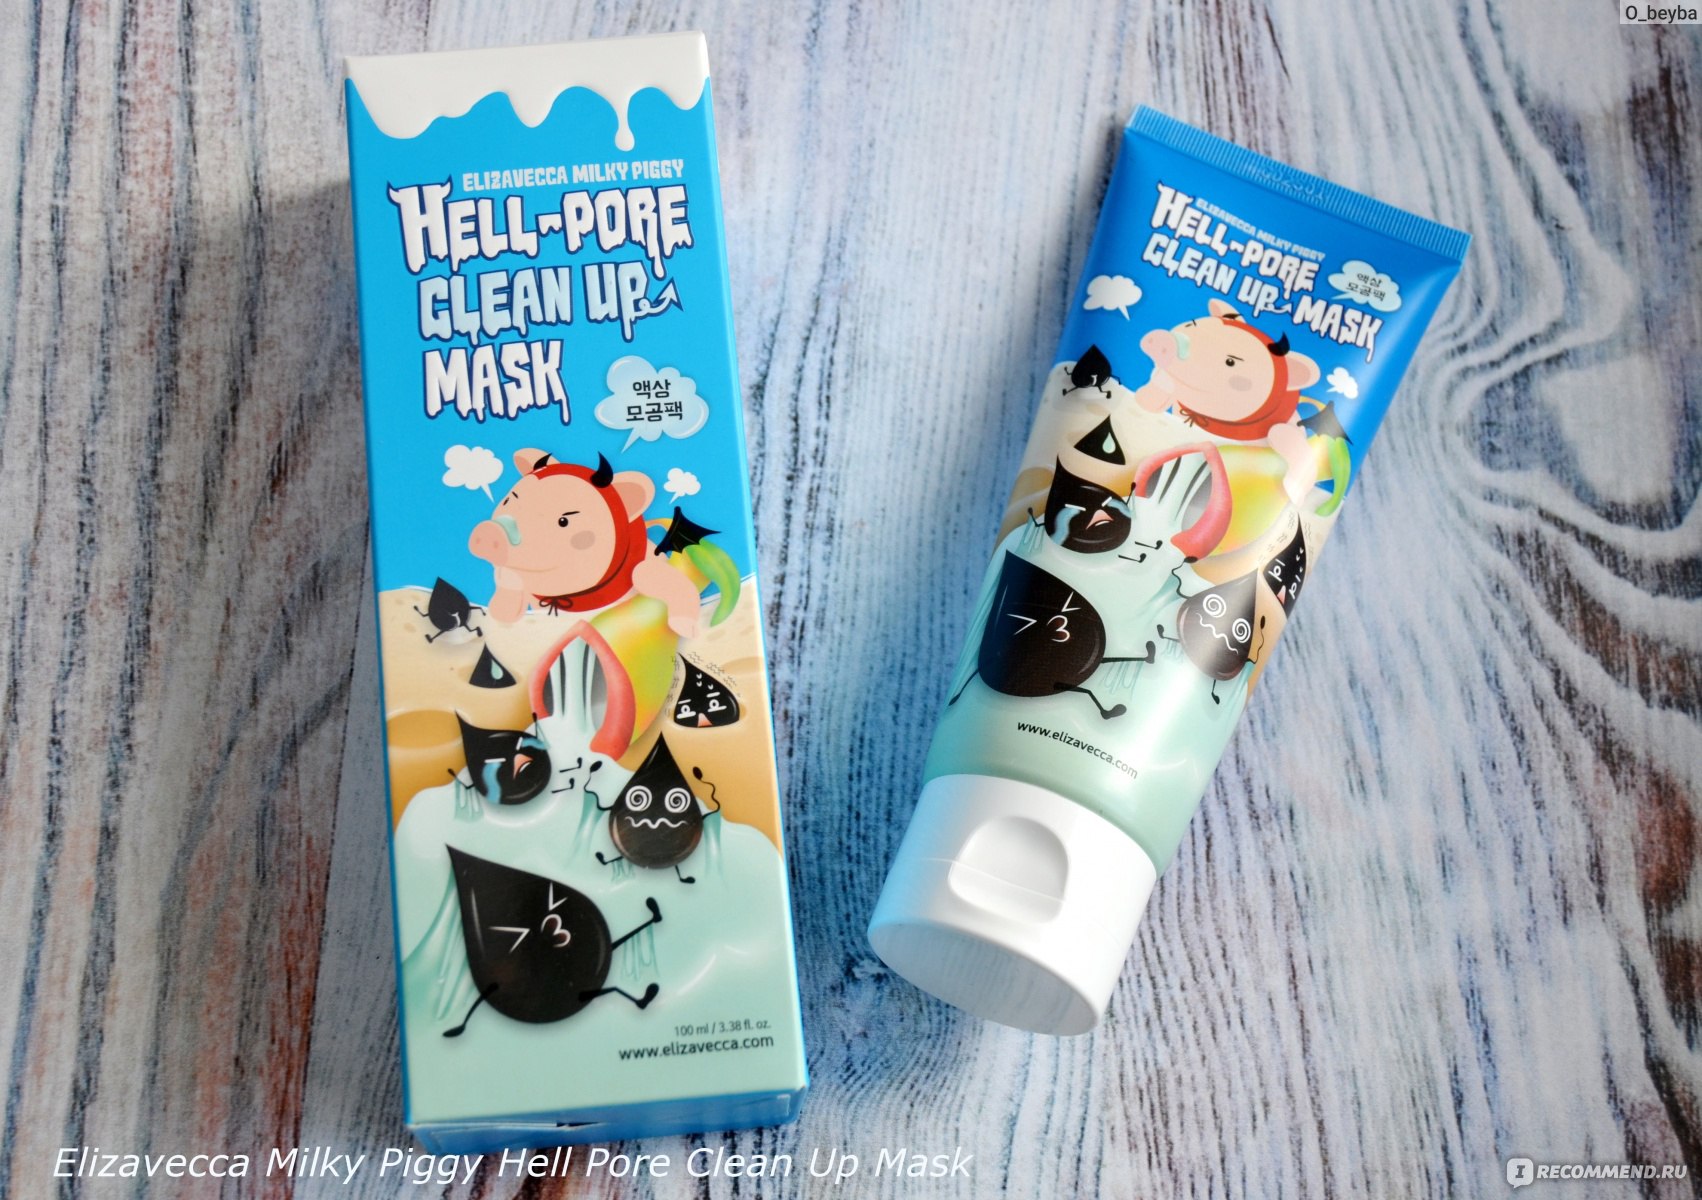 Milky piggy hell pore clean up. Hell Pore clean up Mask. Milky Piggy Hell Pore. Milky Piggy Hell-Pore clean up Mask, 100мл. Hell Pore clean up продукция.